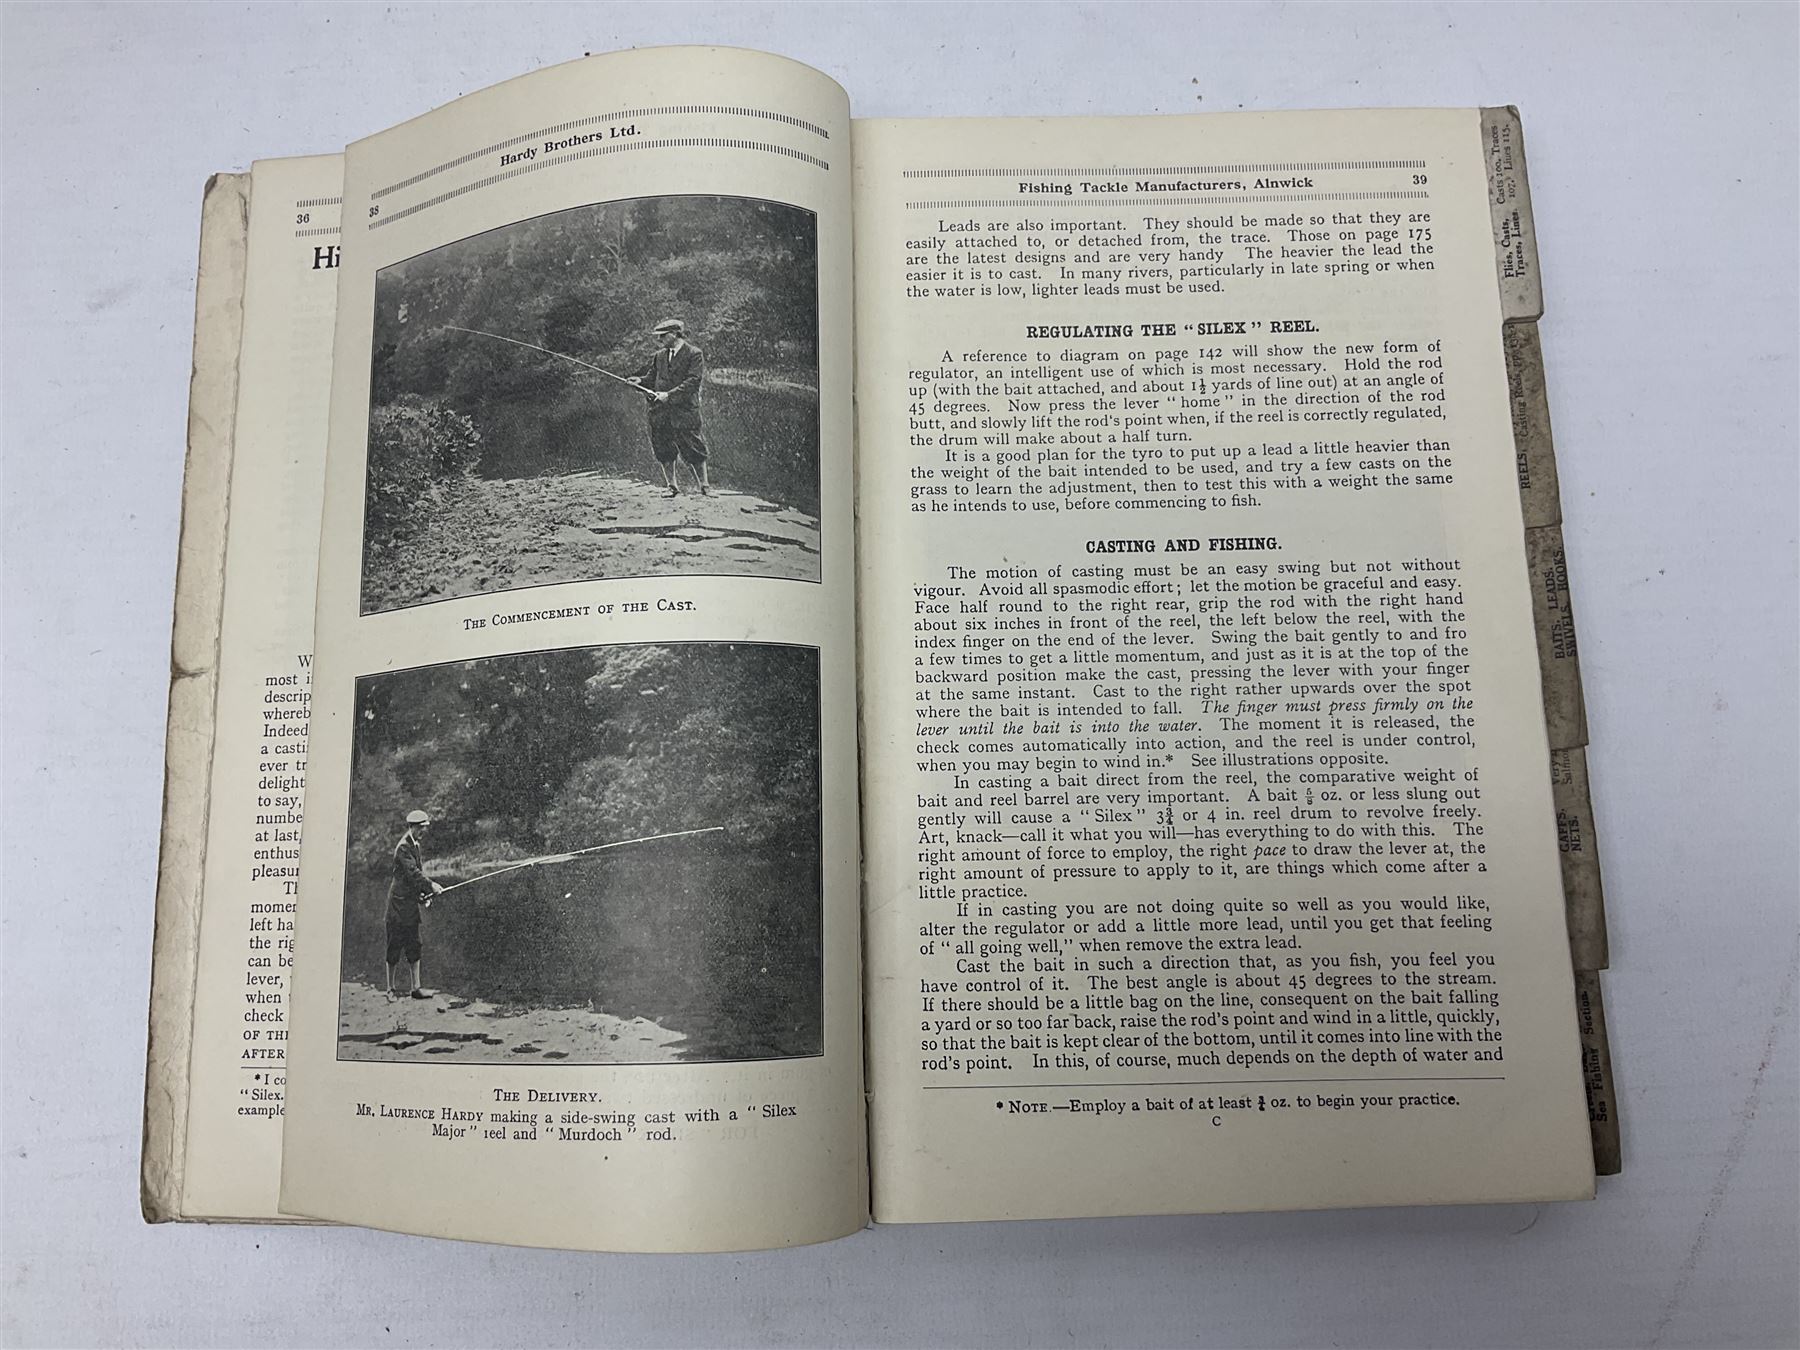 Hardy's Anglers' Guide catalogue, Season 1923, 45th edition, with